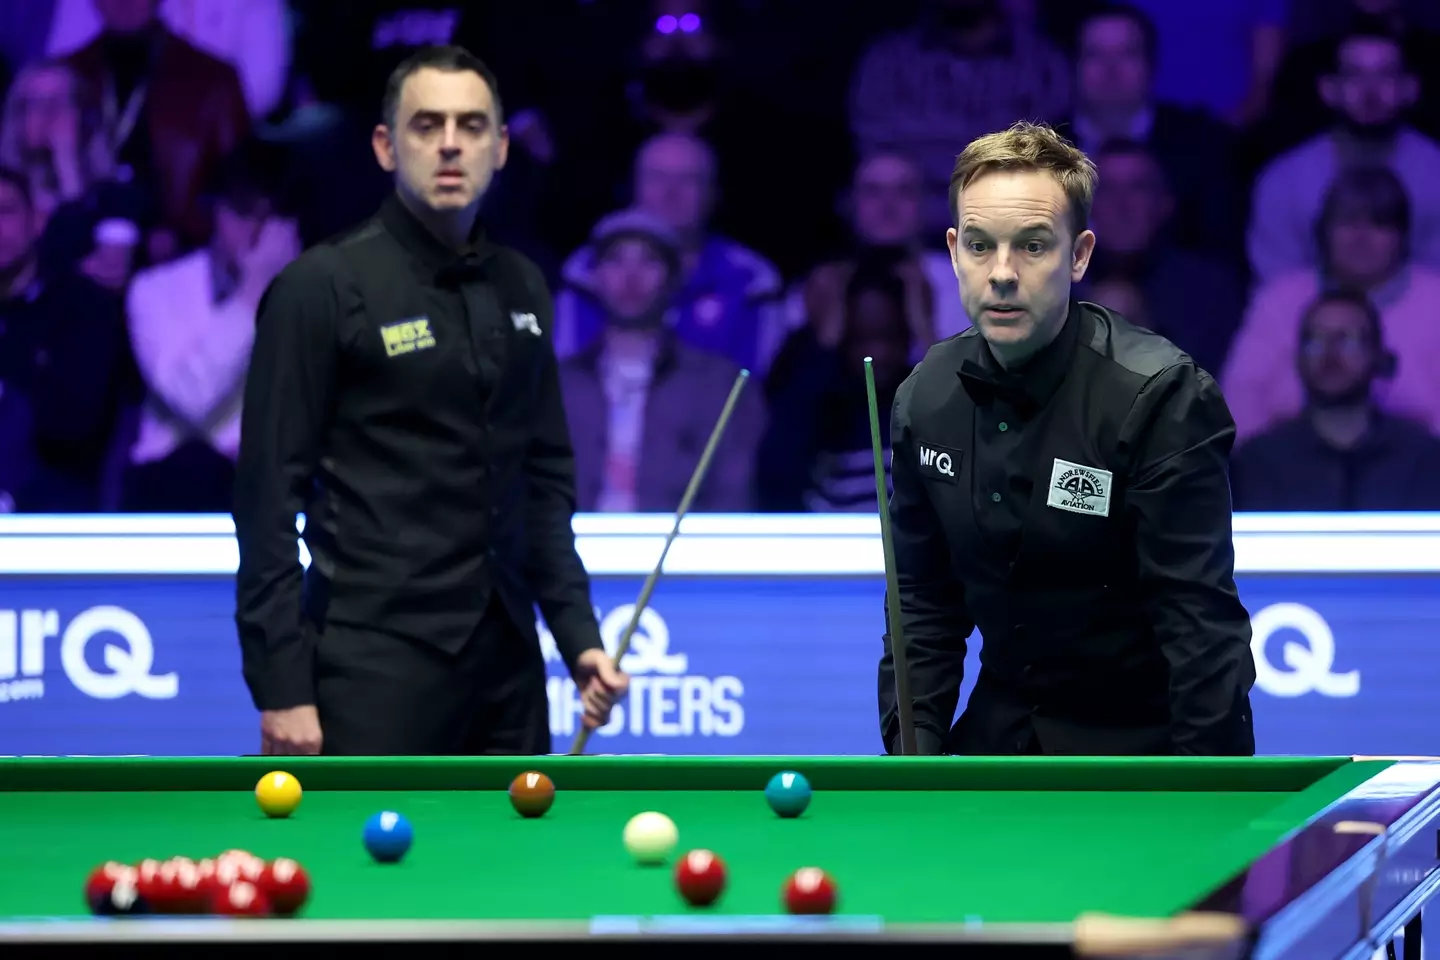 O'Sullivan and Carter during their game on Sunday. (Image